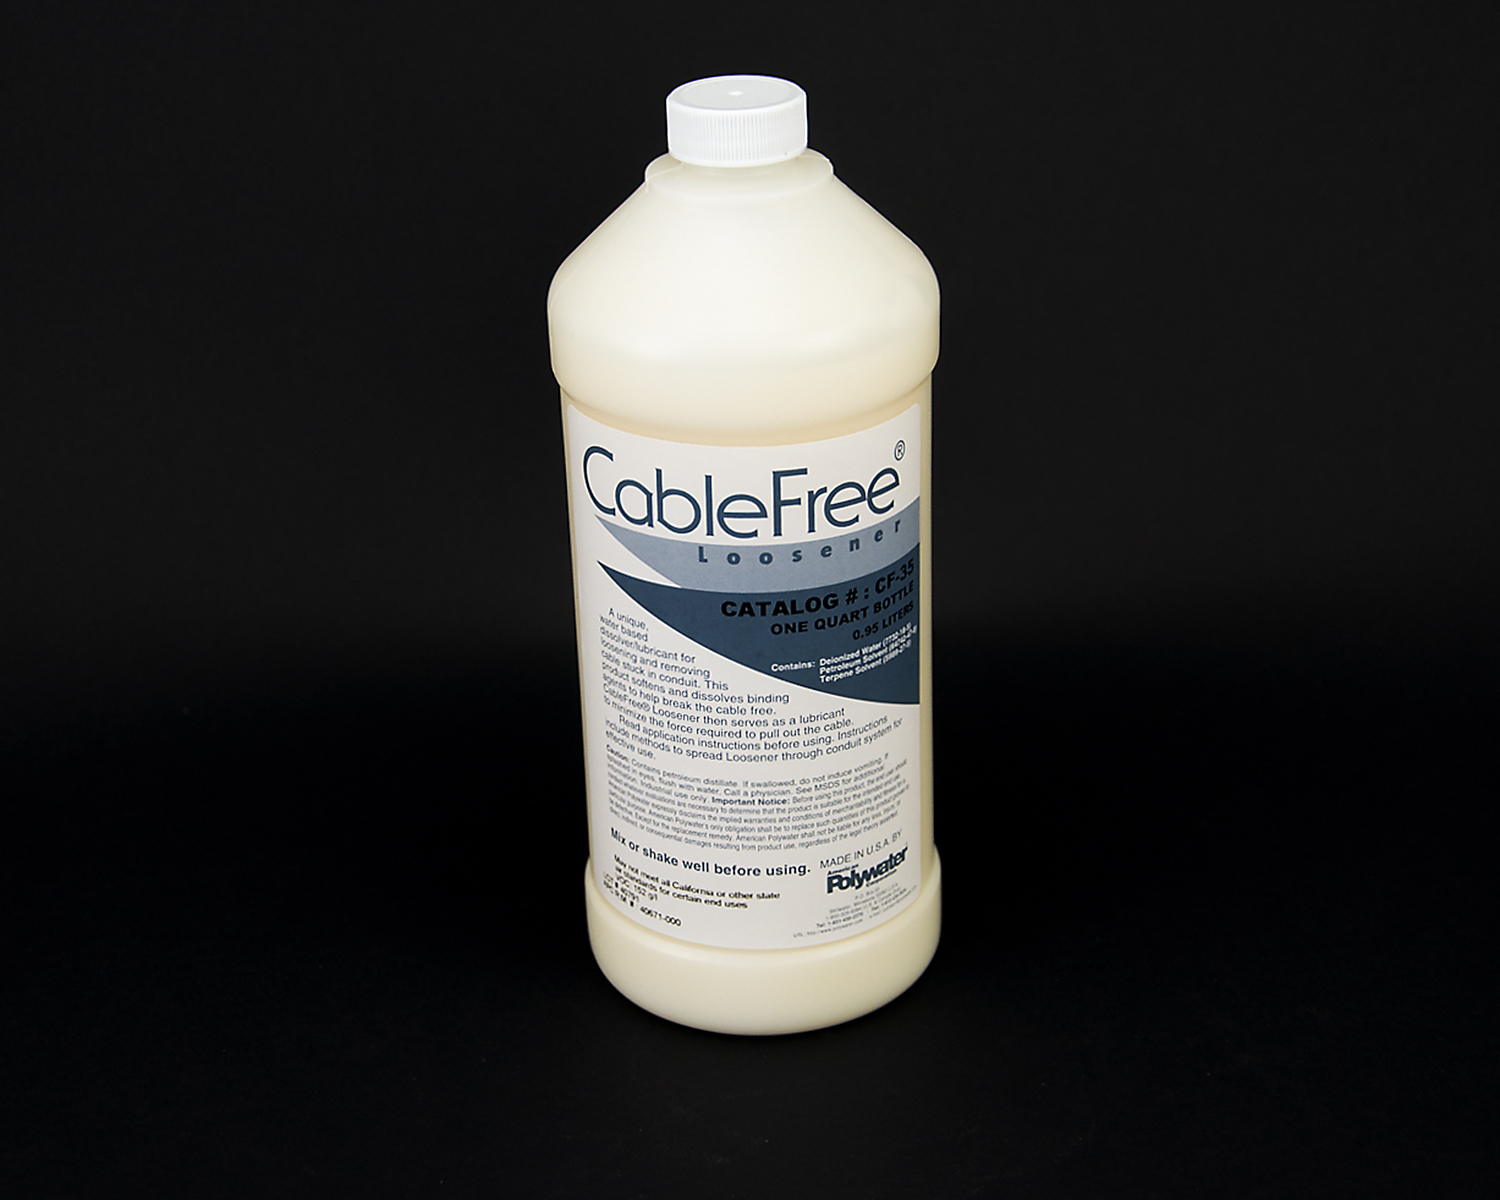 CableFree® Loosener -- A Revolutionary Cable Removal Aid. Loosens Stuck Wires And Lubricates For Pulling Them Out Of Conduits. Leaves Ducts Undamaged. Lowers Reclamation Costs